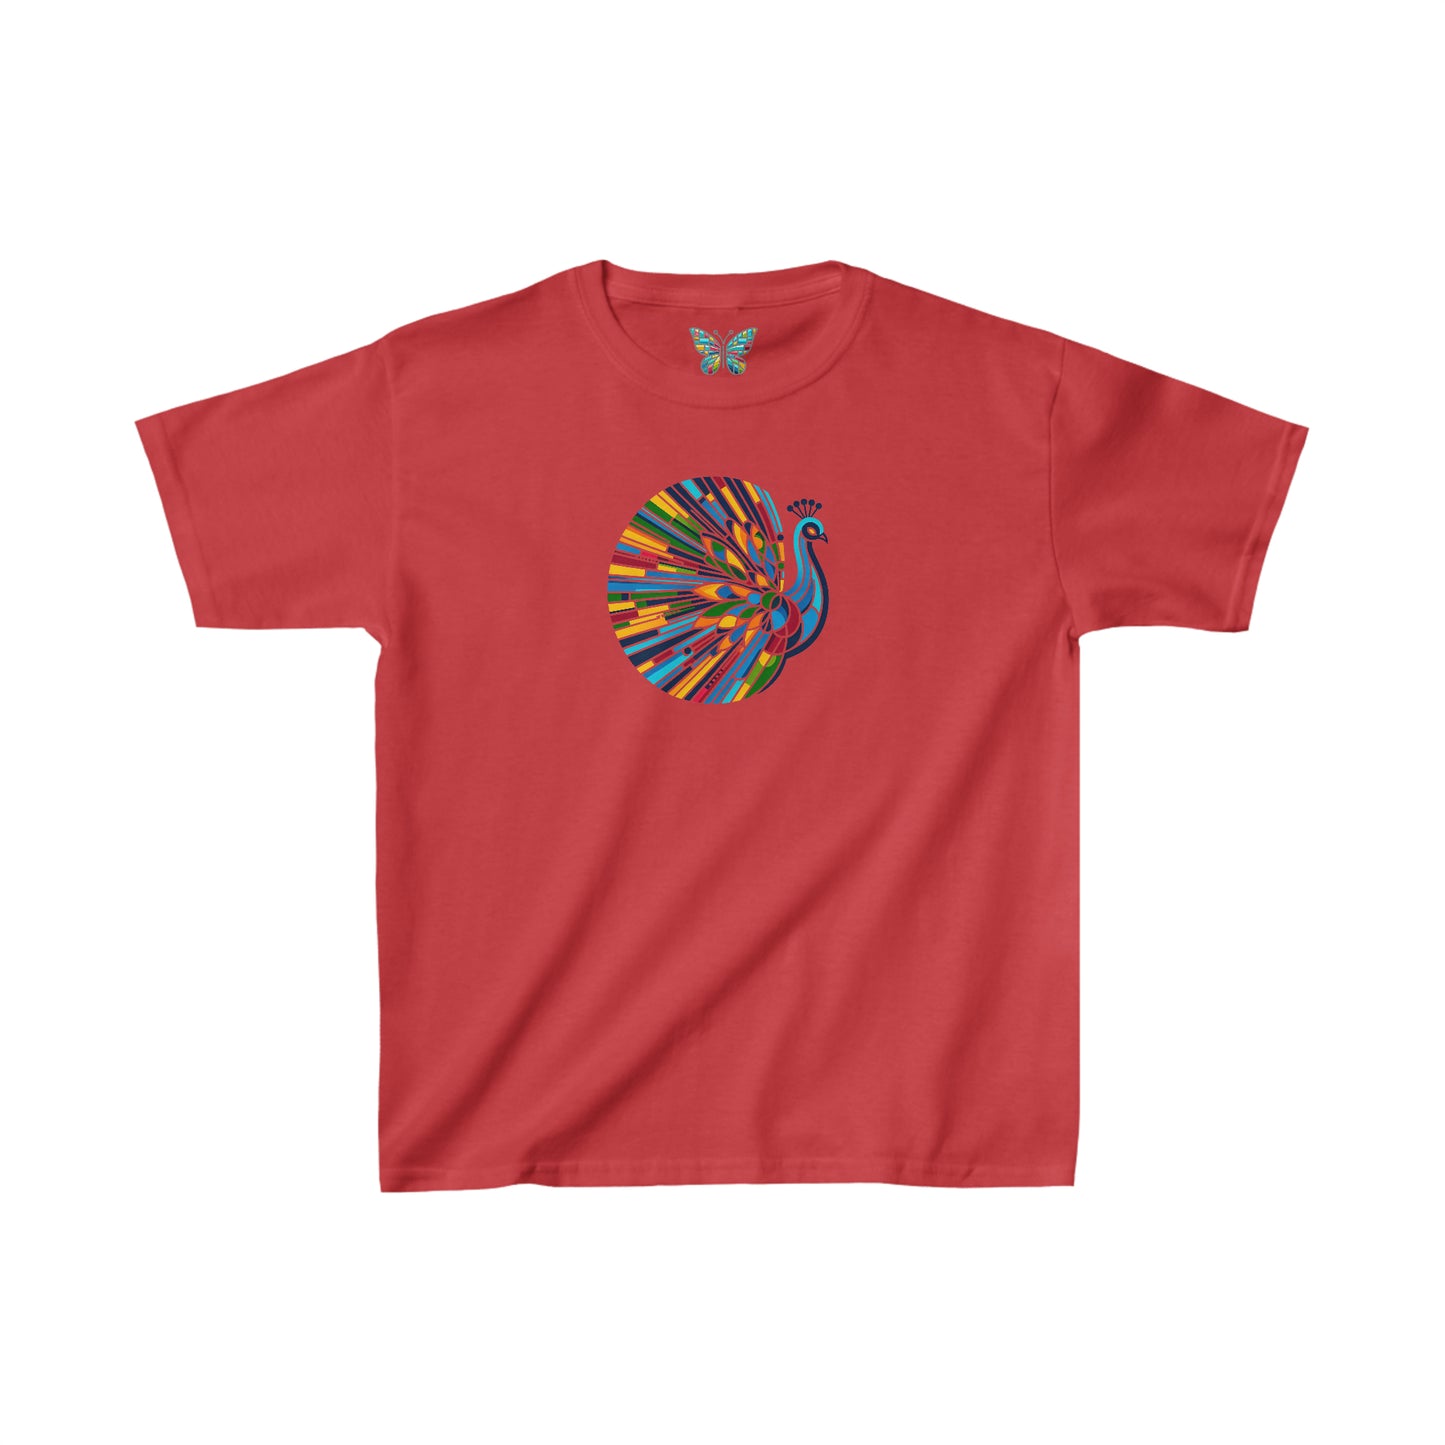 Peacock Blissment - Youth - Snazzle Tee